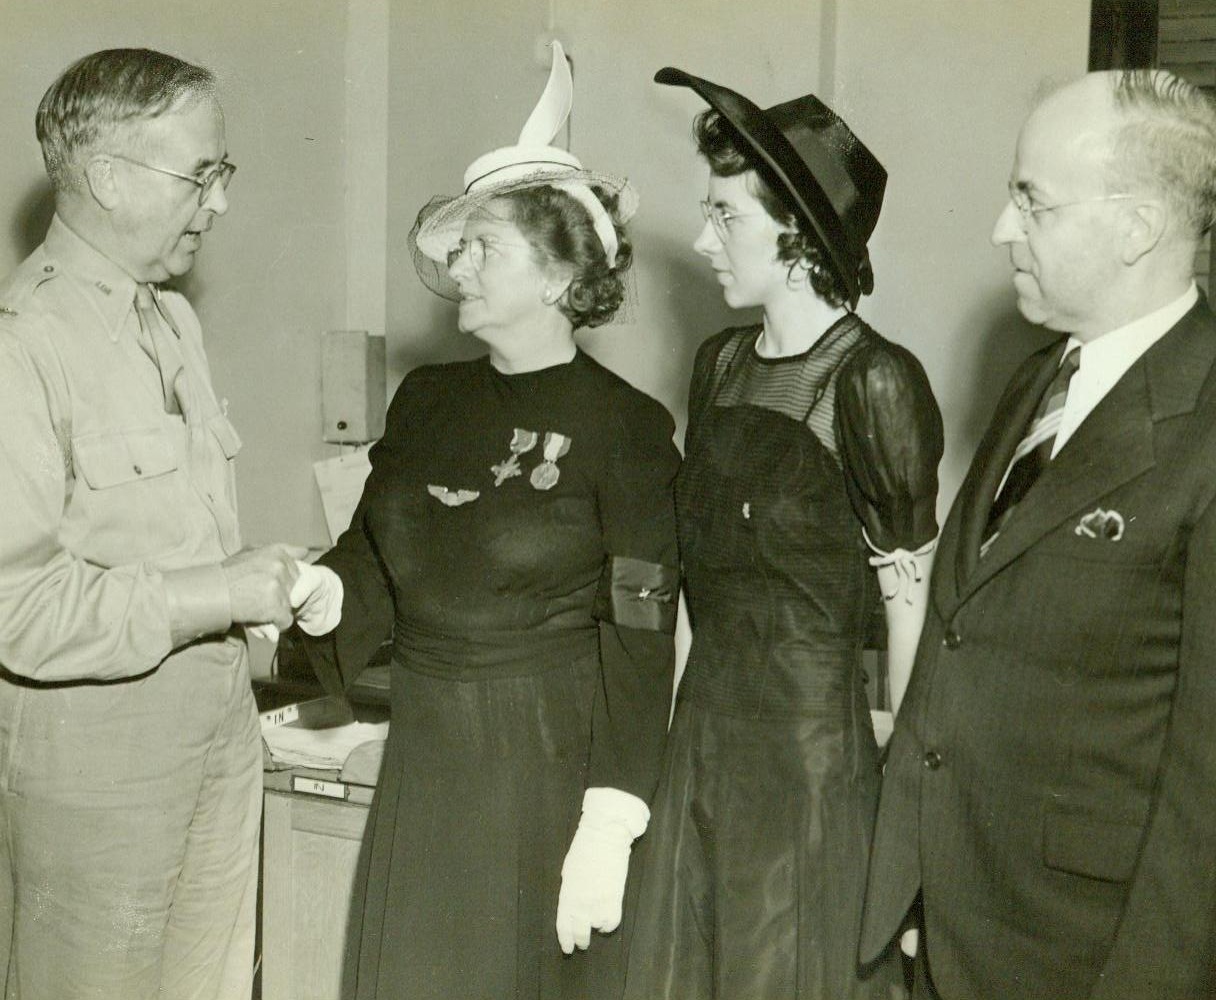 Recieves Son's Posthumous Awards, 8/13/1943. New York, N.Y.—Mrs. Mary C. Church, of 66 Deleware Avenue, Dumont, N.J., mother of the late 1st Lieut. Russel M. Church, Jr., 17th pursuit Squadron, U.S. Army Air Forces, received the Distinguished Service Cross and Soldier’s Medal, posthumously awarded to her son who was killed in action in the Philippines December 16, 1941. Here, in ceremonies in the office of Col. Thomas L. Crystal, post commander, Fort Jay, Governors Island, are, (Left to Right): Col. Crystal, who presented the medals; Mrs. Church; Miss Mary Church, the hero’s sister; and Russel M. Church, Sr., his Father. Mrs. Church wears her son’s wings and the two medals, (The D.S.C. on left and Soldiers medal, right).  8/13/42 (ACME);